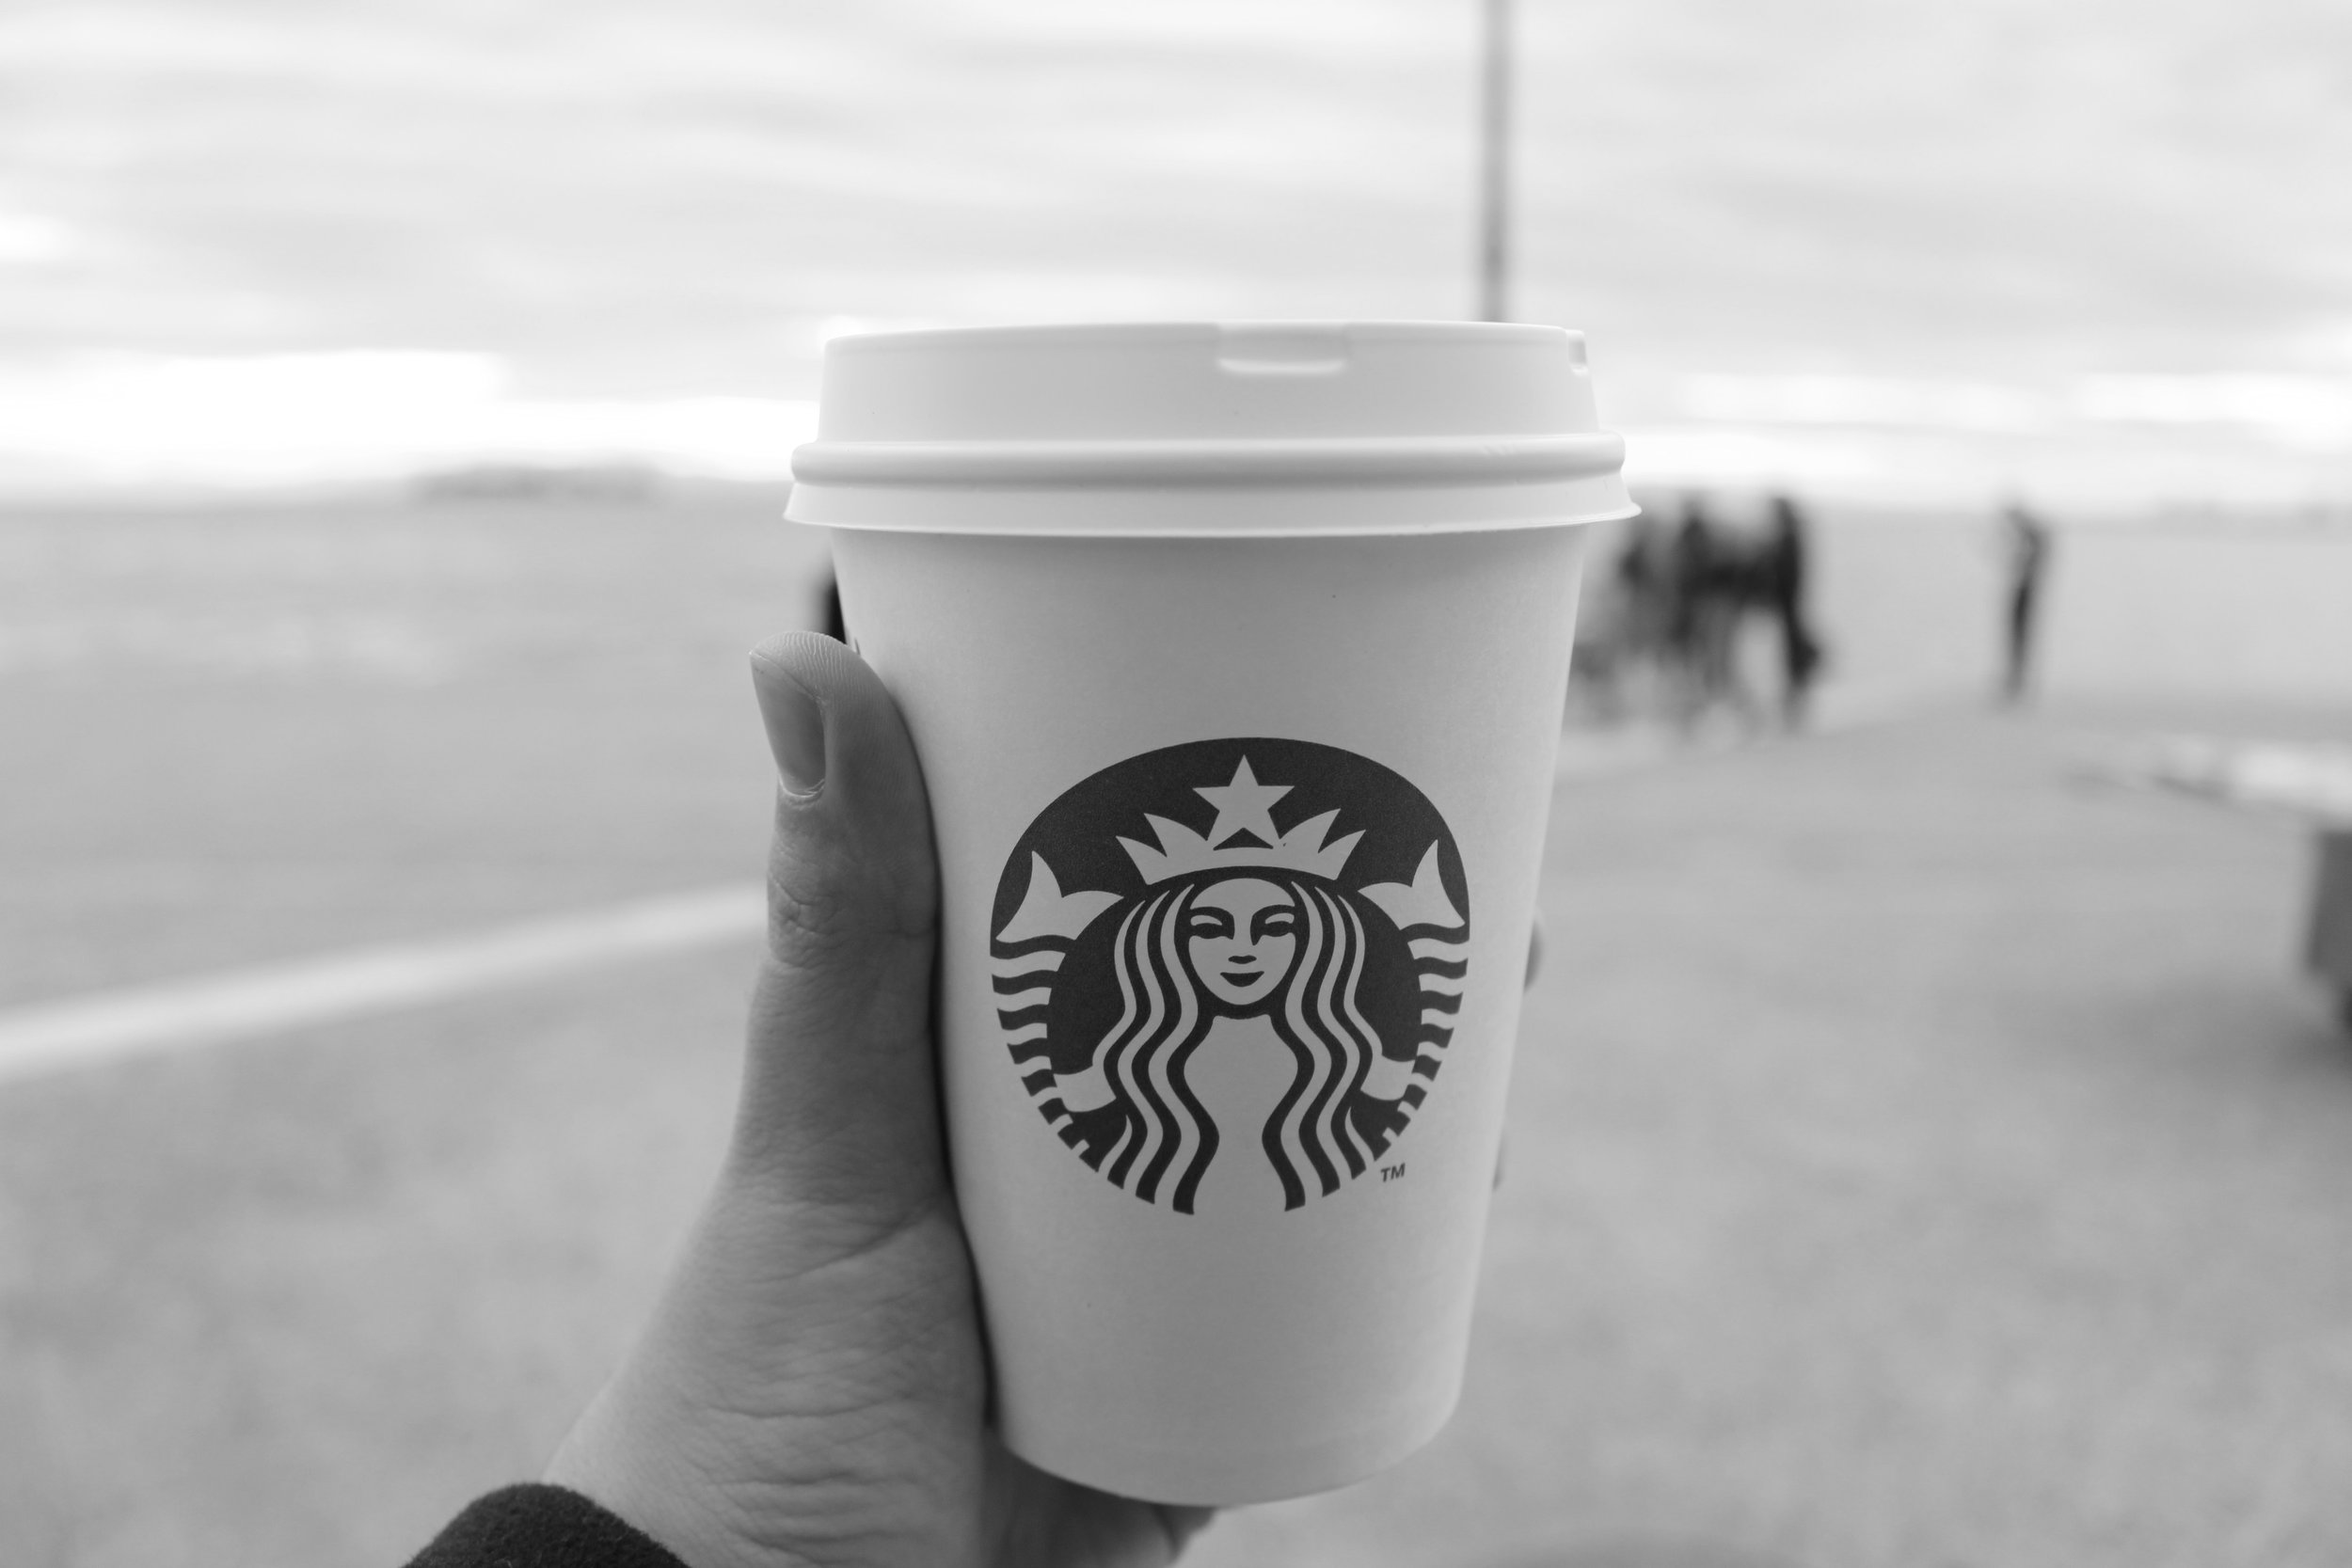 A Starbucks coffee cup being held in front of the camera.